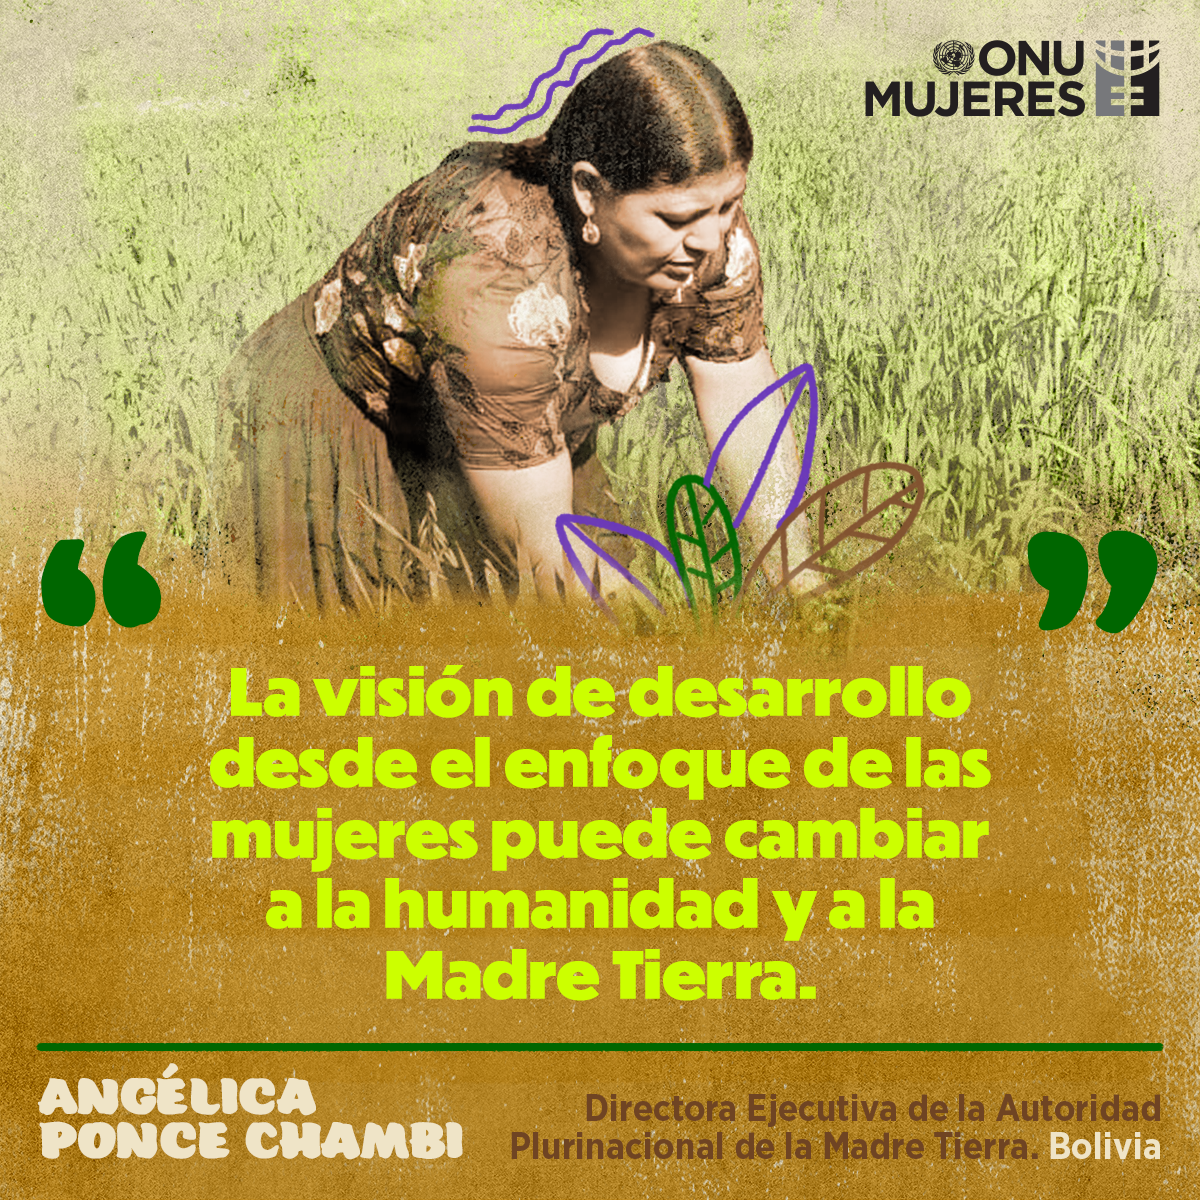 ES-Quote-Bolivia-AngelicaPonceChambi-8M-UNW